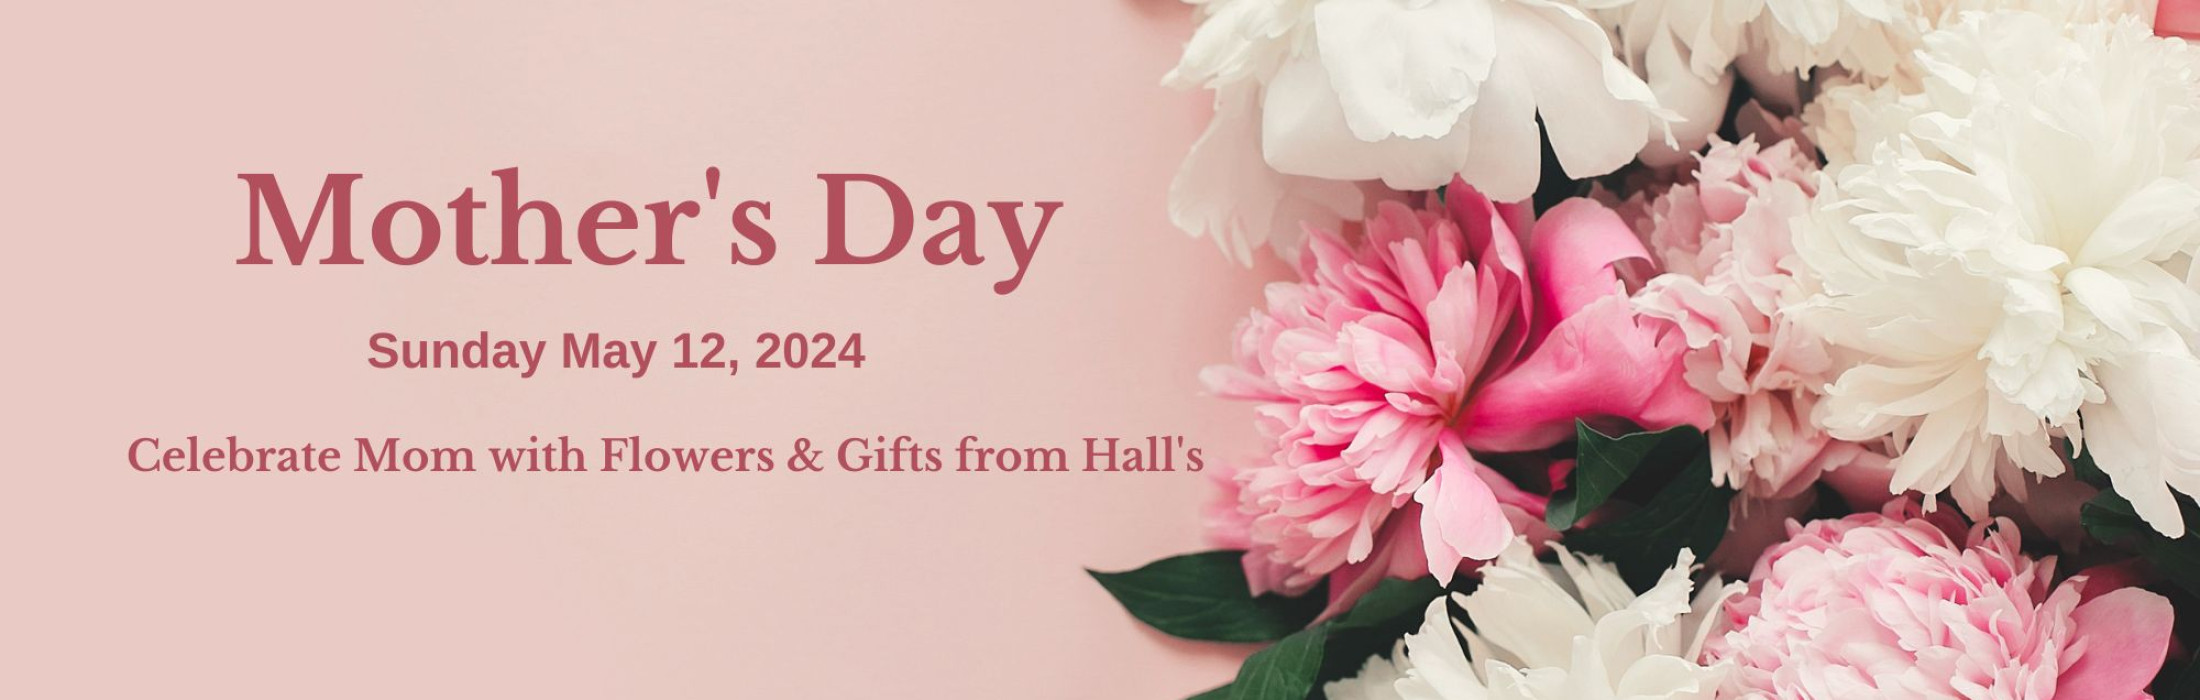 mothers day banner 